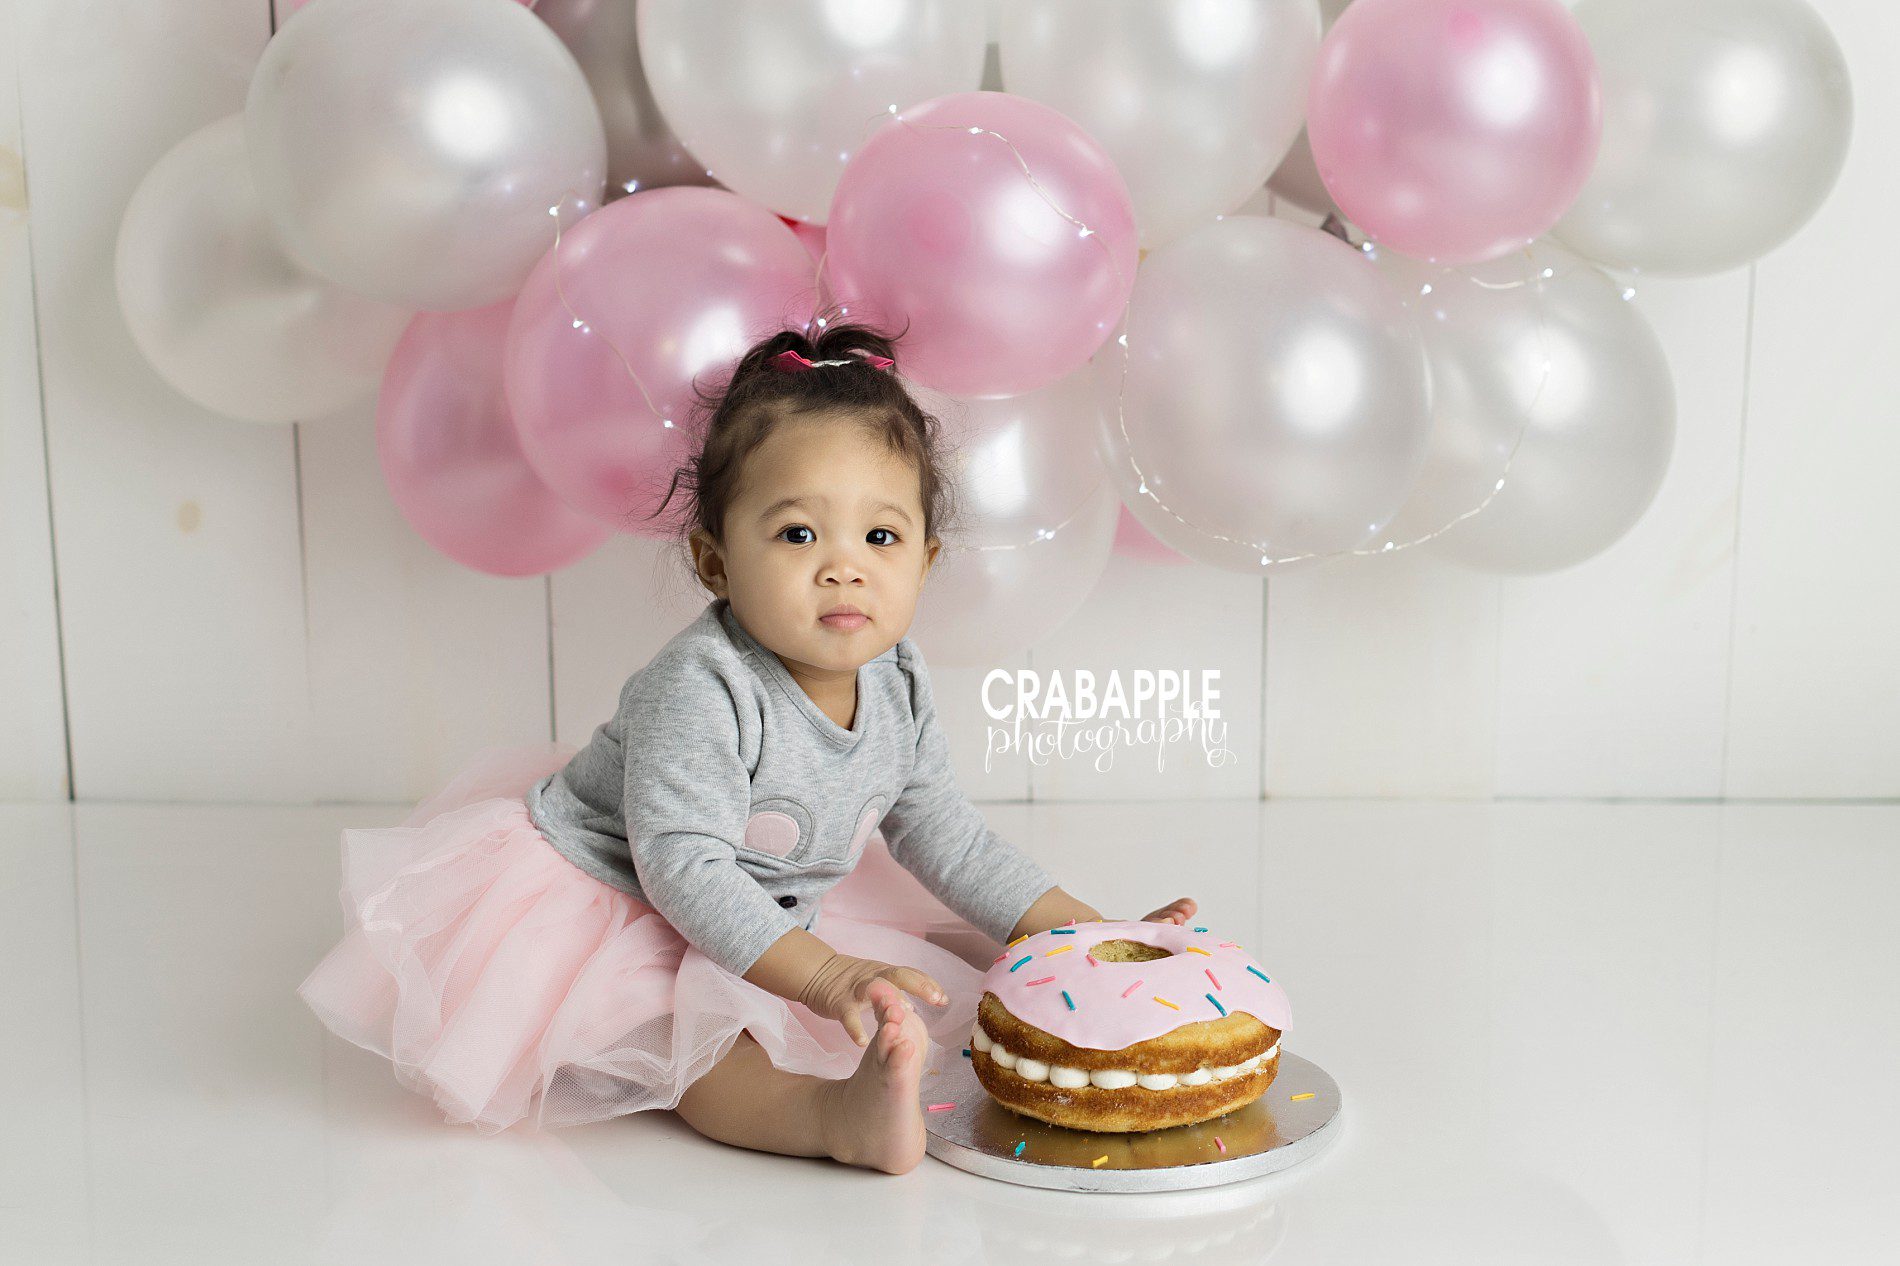 Baby Photography Archives · Page 18 of 239 · Crabapple Photography